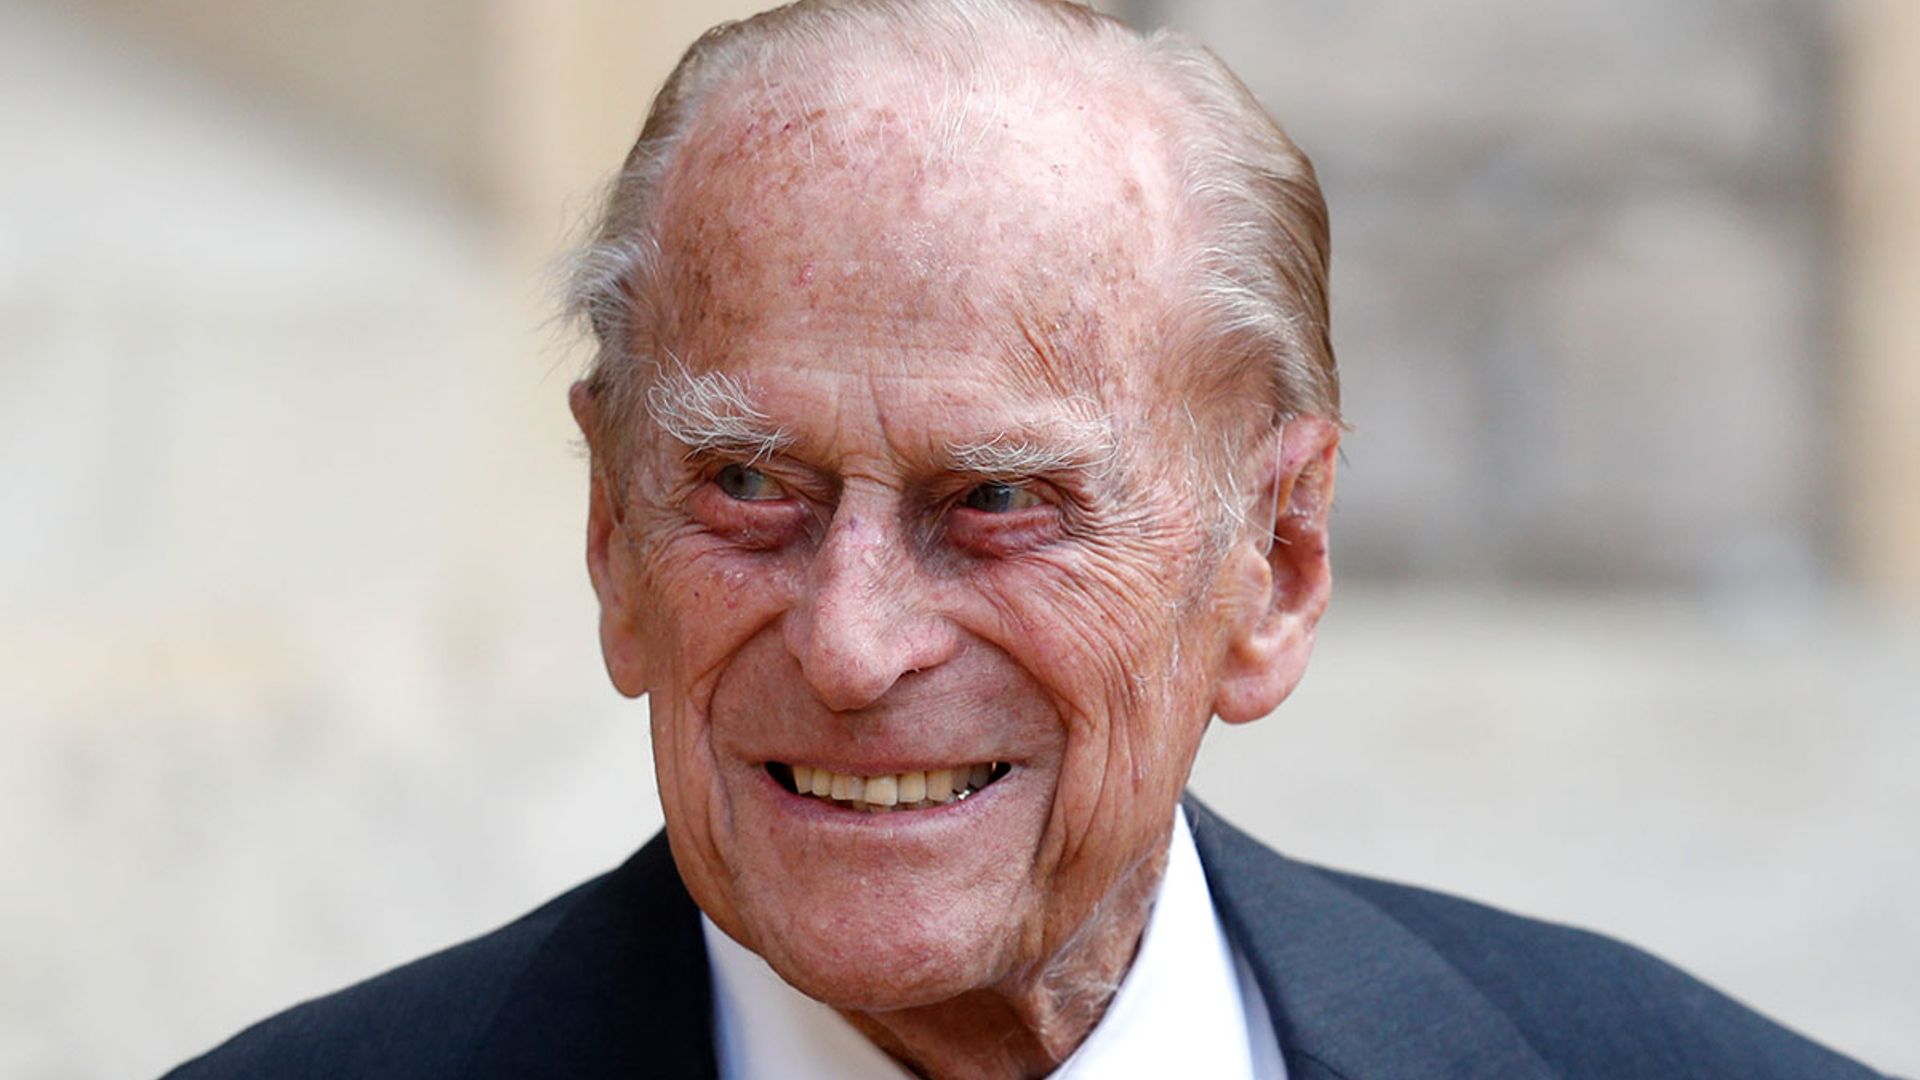 Prince Philip exhibition to feature royal wedding items, coronation robe and private journal